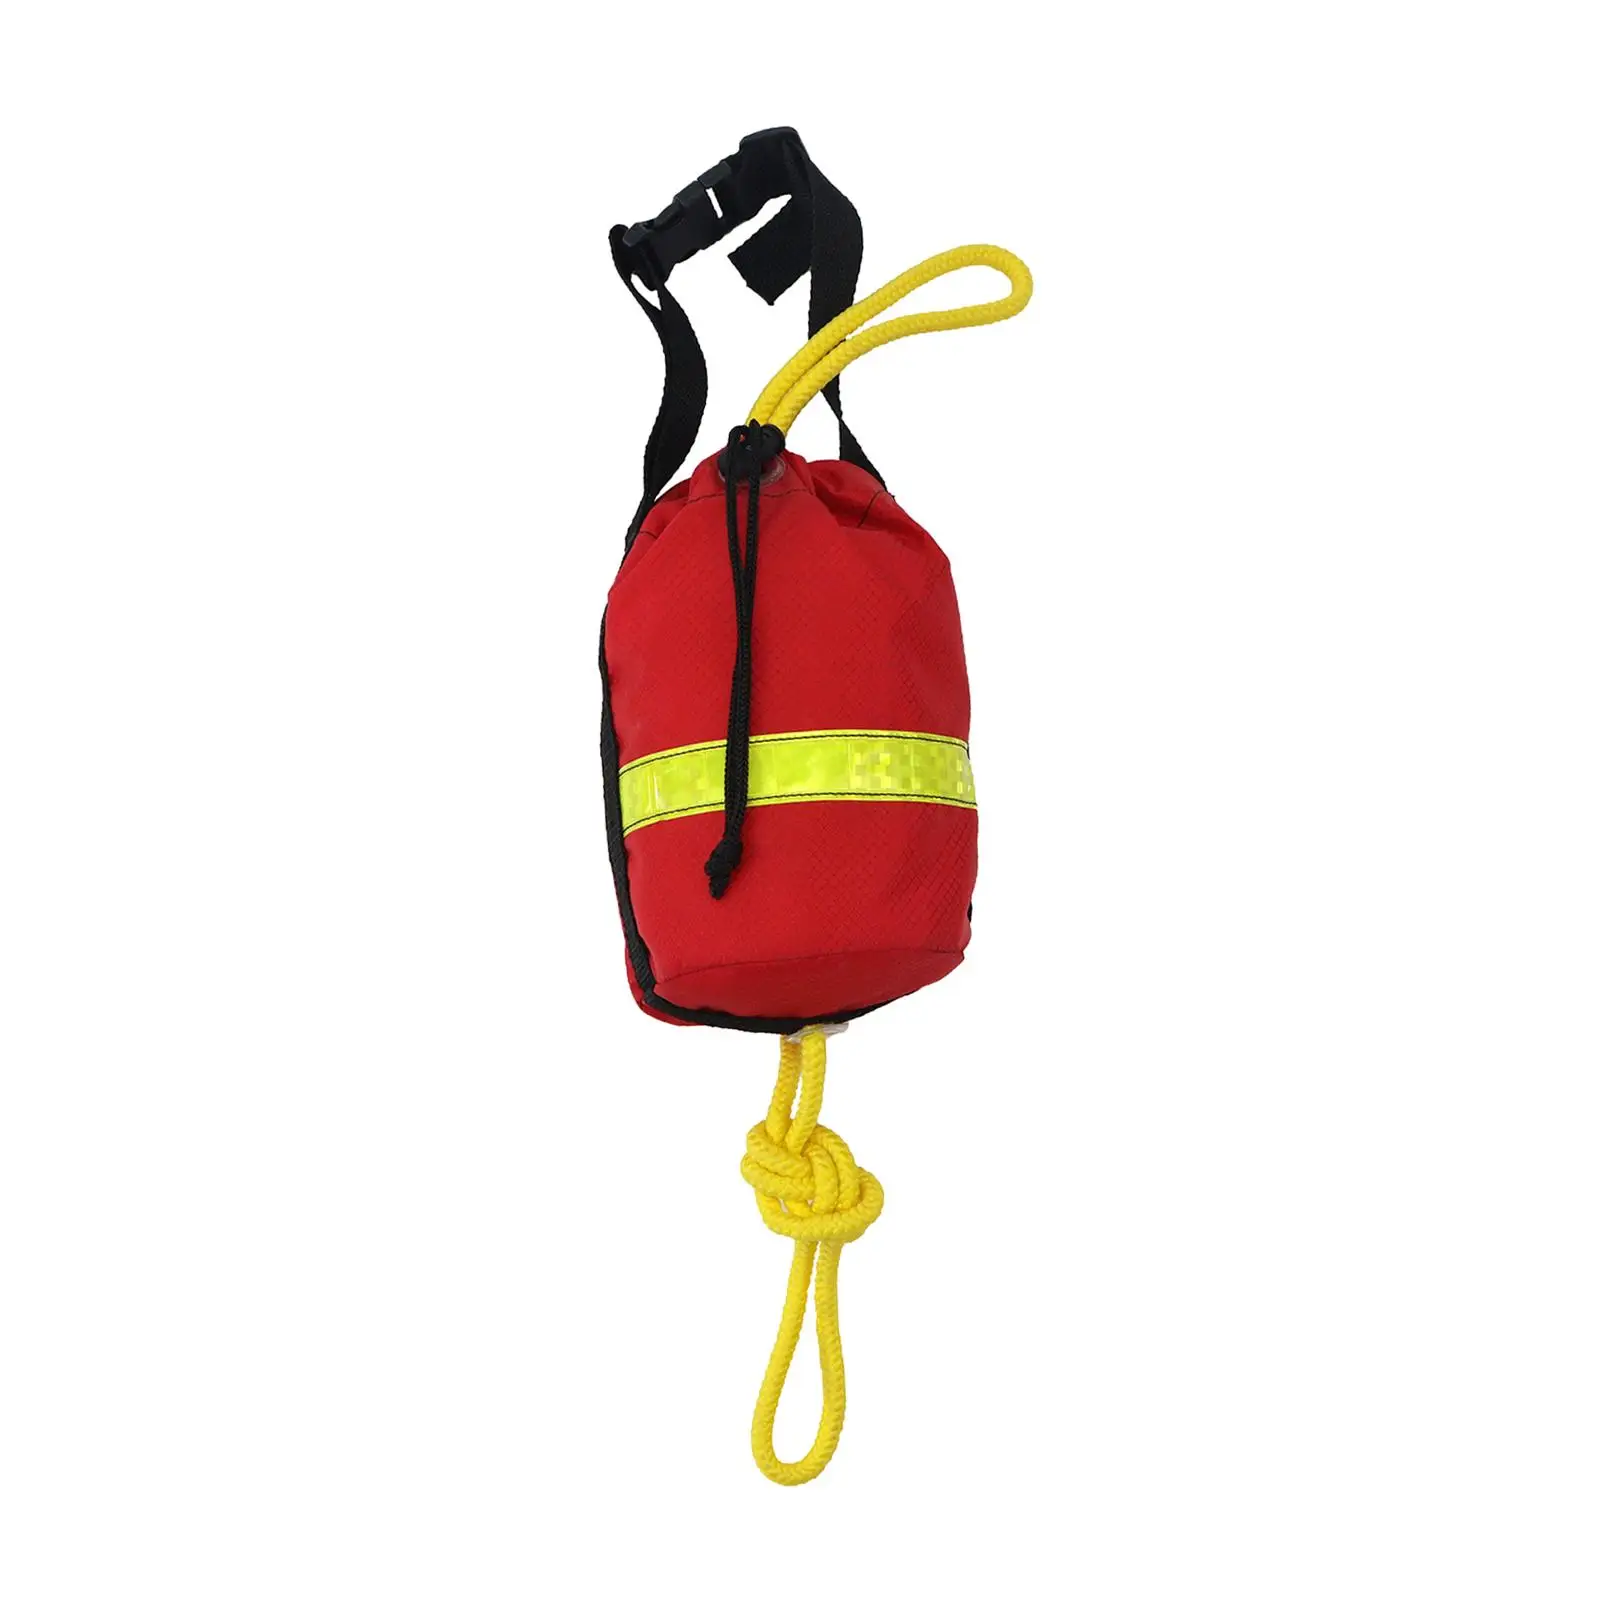 16M Rope Throw Bag Flotation Device for Kayaking Canoeing Buoyant Dinghy